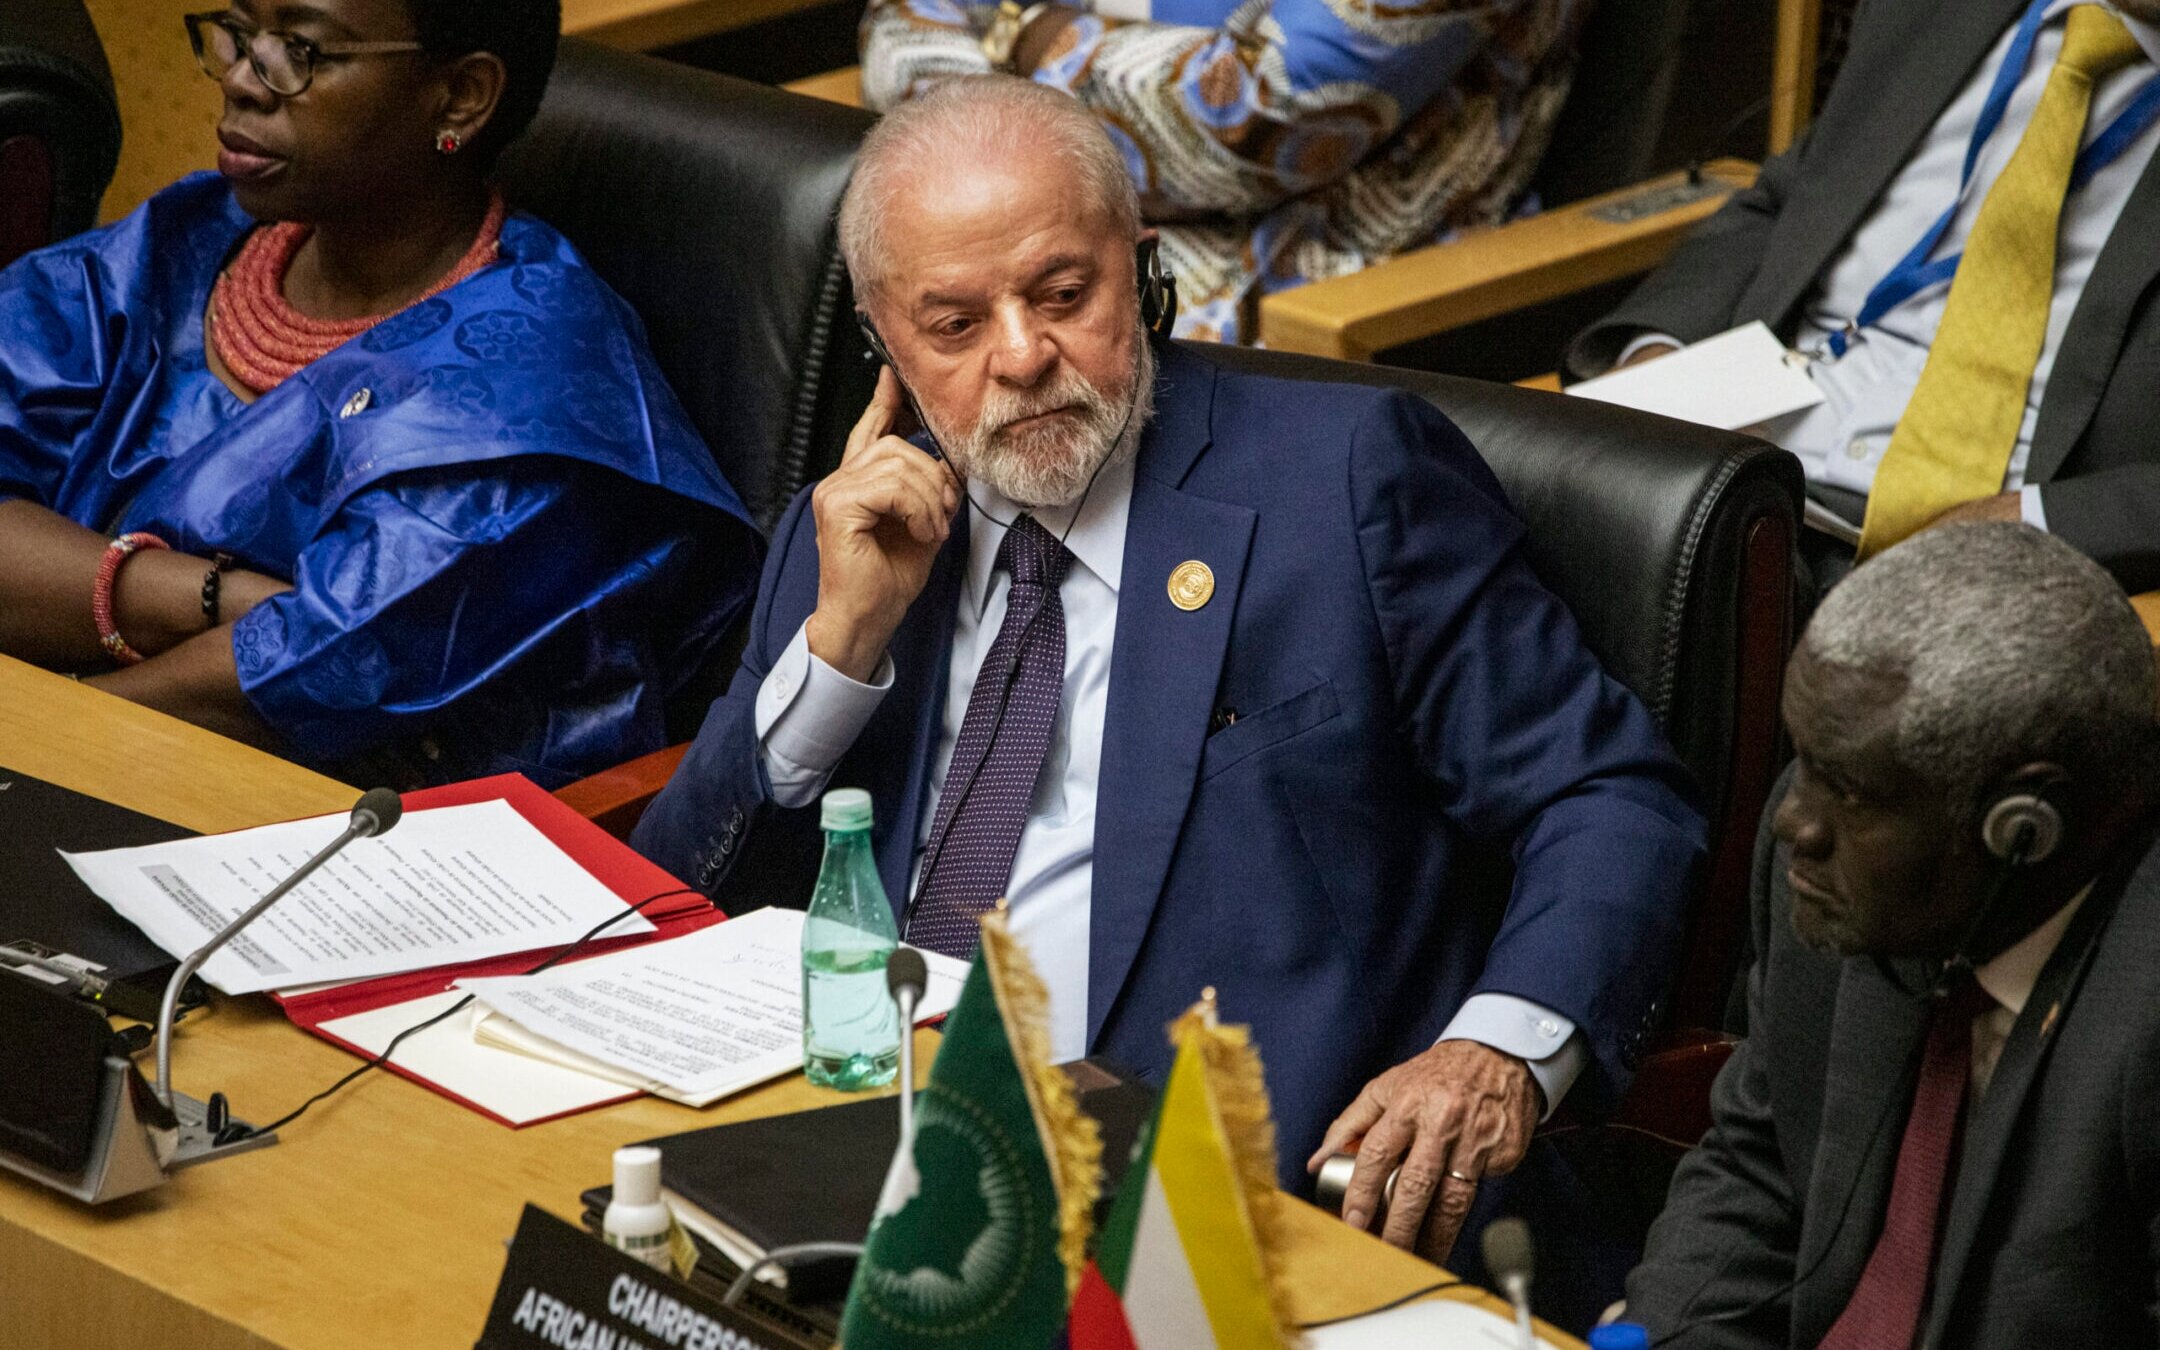 Brazilian President Luiz Inacio Lula da Silva attends the 37th Ordinary Session of the Assembly of the African Union at the AU headquarters in Addis Ababa, Ethiopia, Feb. 17, 2024. (Michele Spatari / AFP via Getty Images)